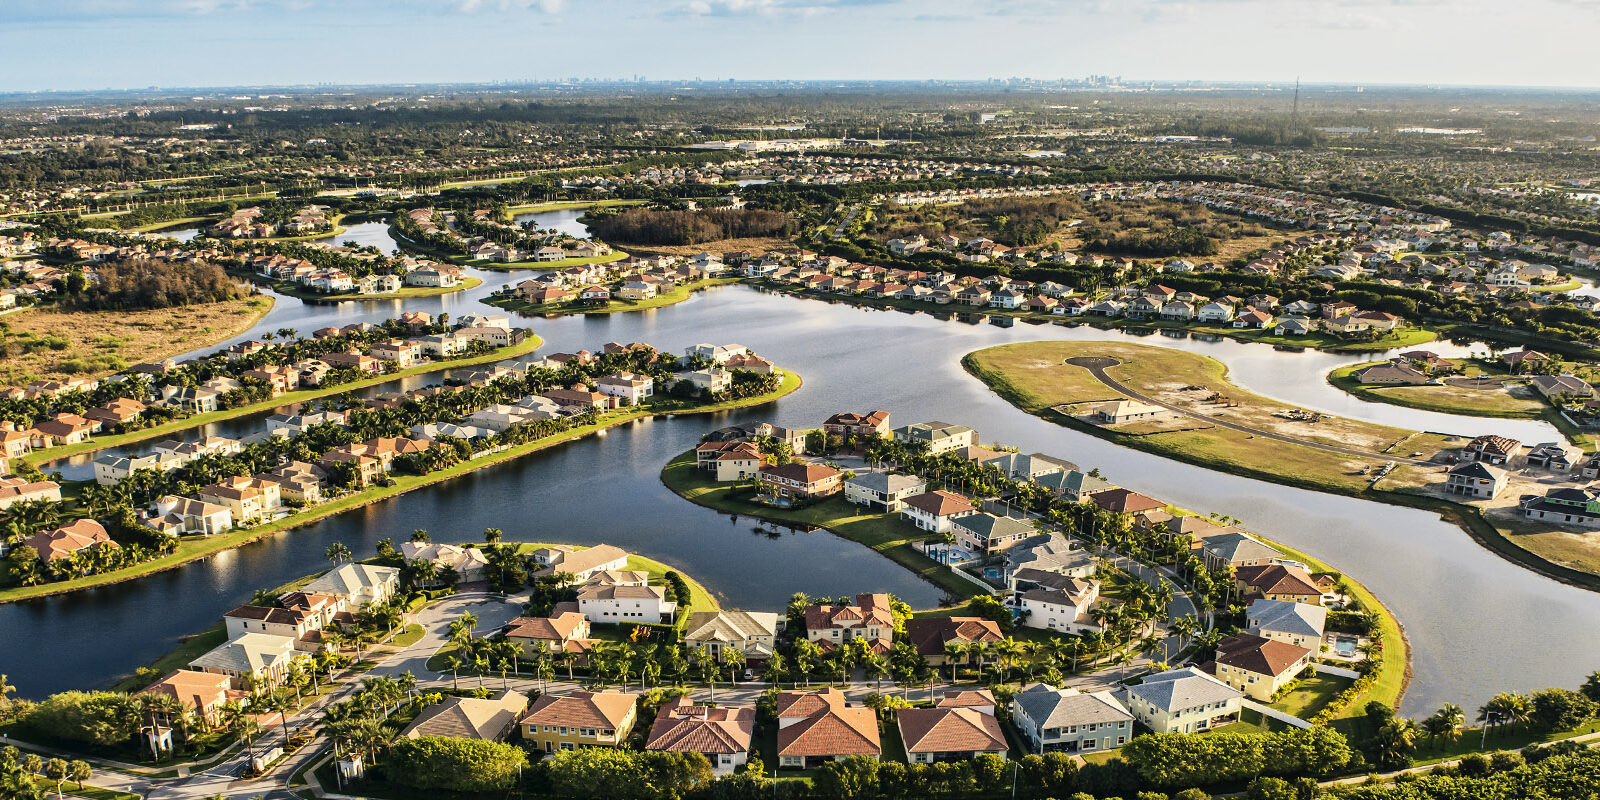 TurboTenant Report: The Best Places to Buy Rental Investment Property in Florida